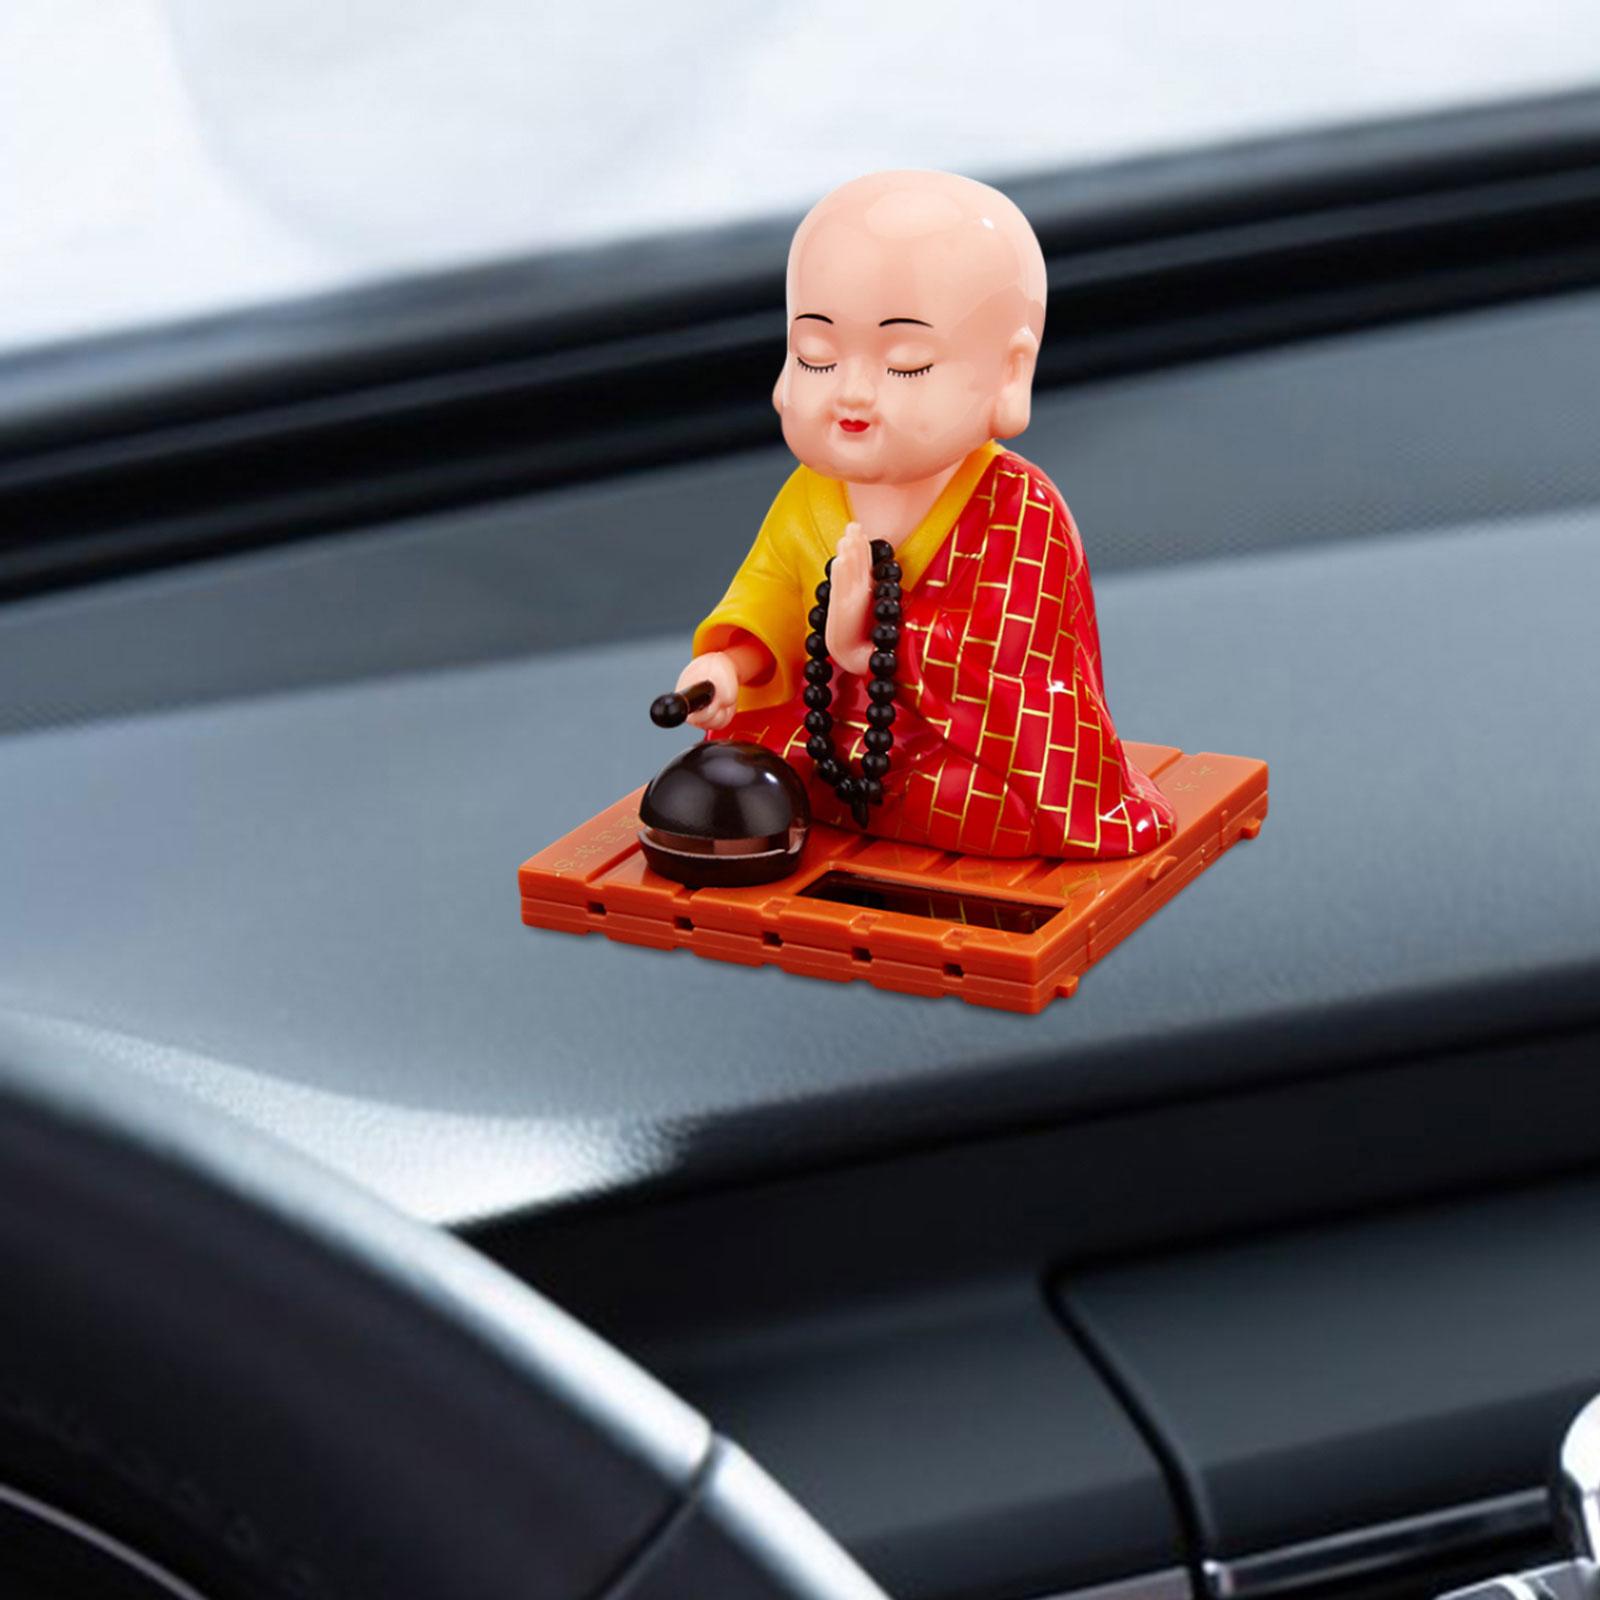 Little Monk Figurine Solar Powered Car Toy Bobble Head Toy Car Ornament L Red